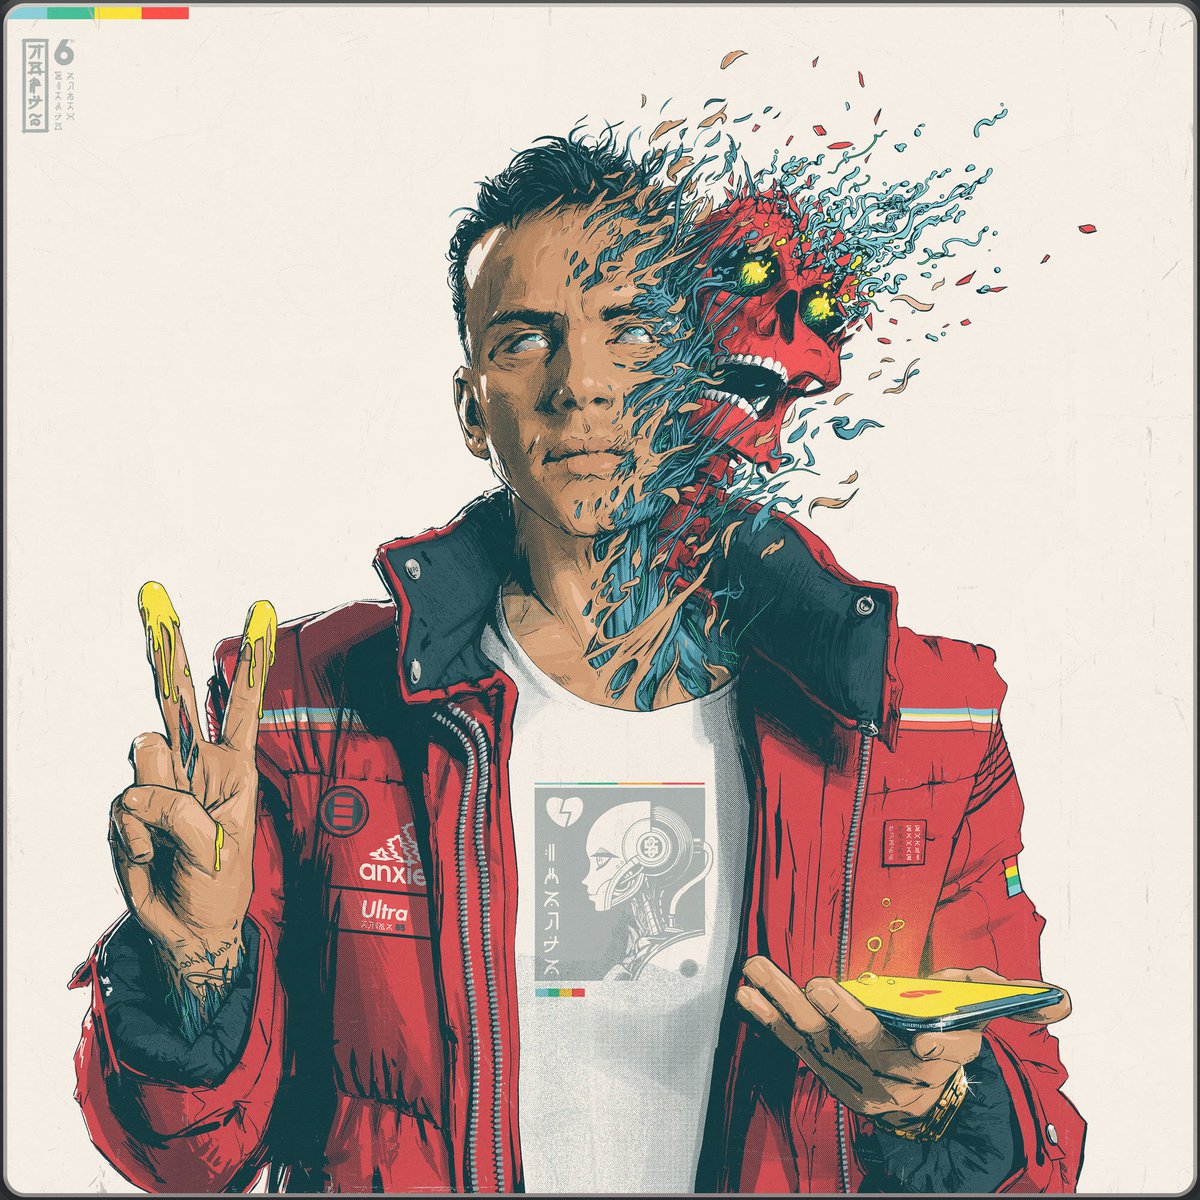 Logic — Confessions of a Dangerous Mind 
The official follow-up to YSIV. Available now. 
#PlusThursday #NewMusicFriday #ConfessionsOfADangerousMind